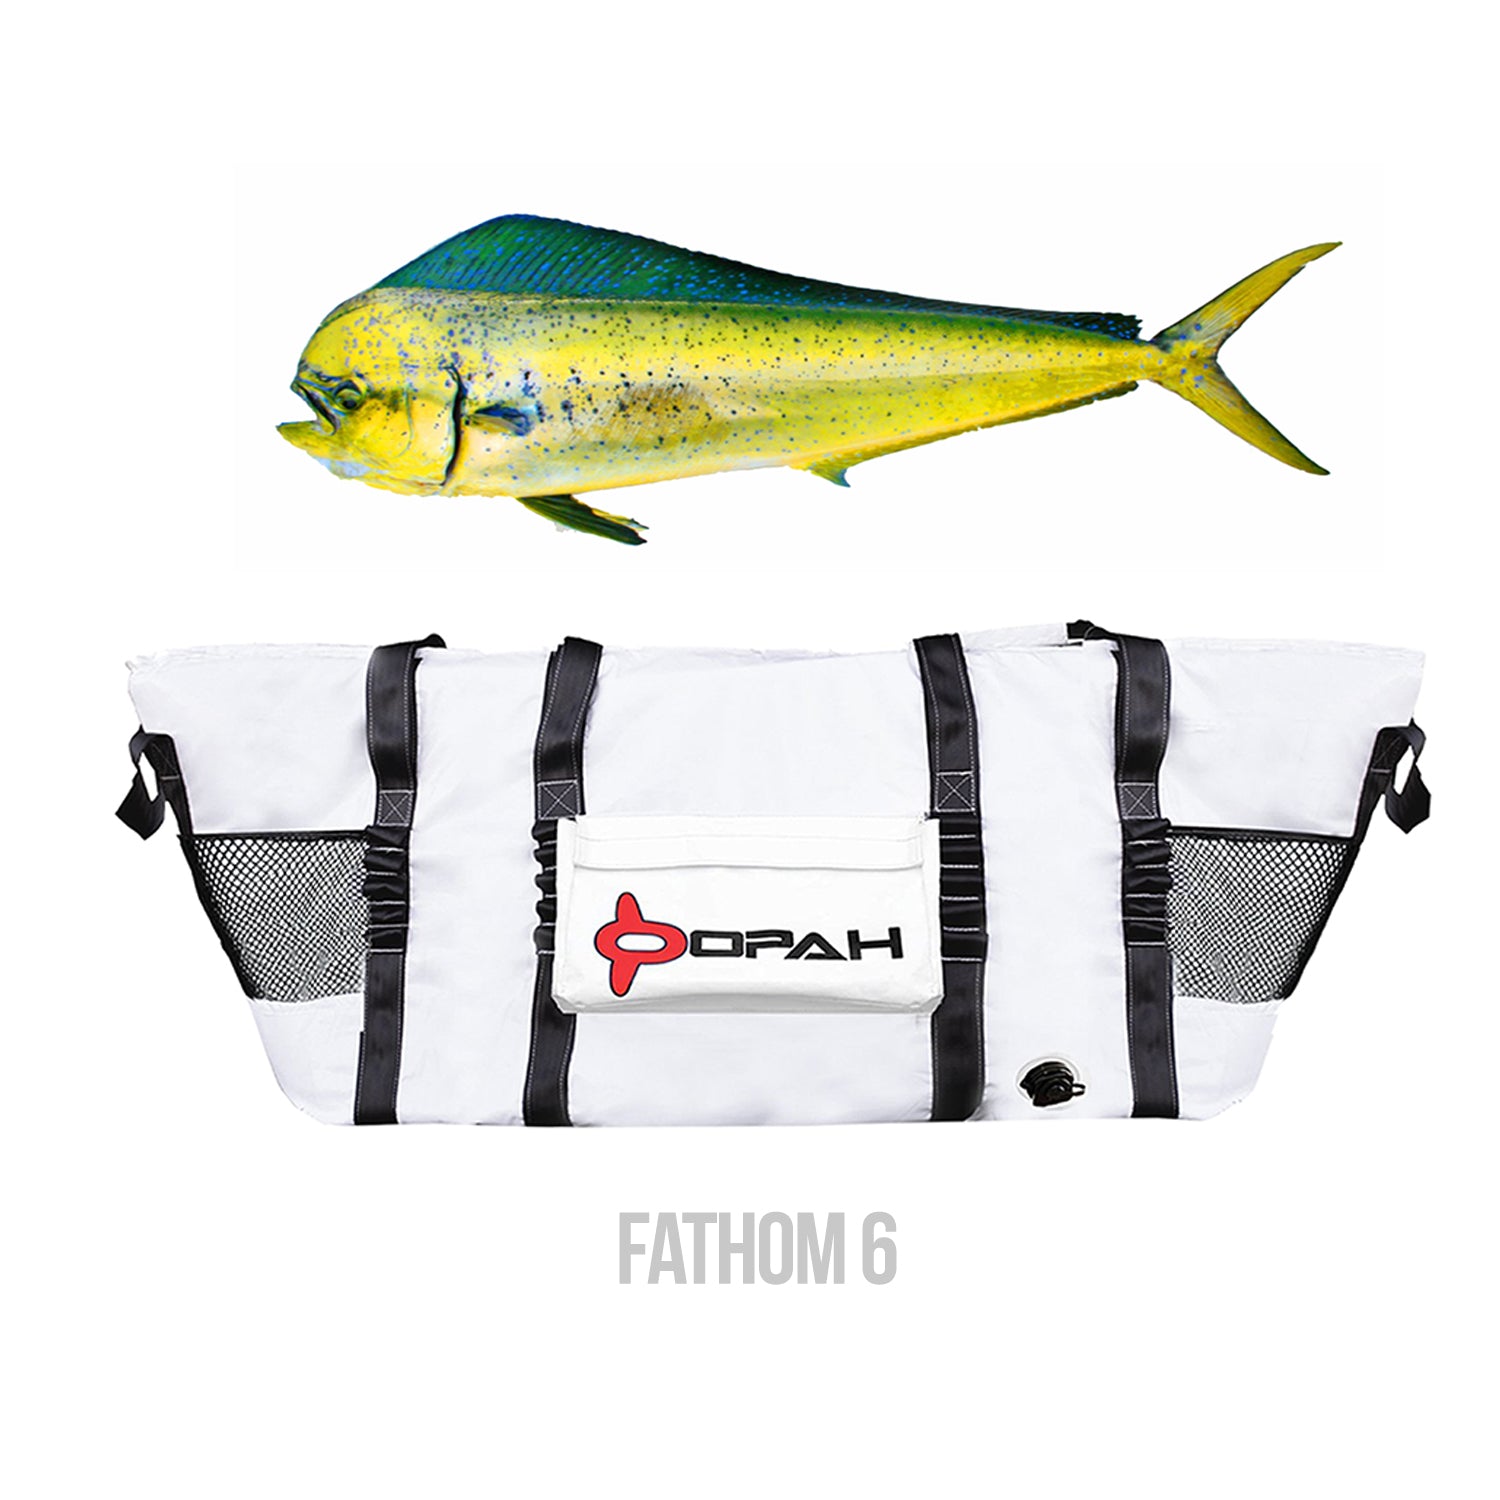 Fathom 6 Insulated Cooler Bag, Offshore 70Lx 24W x 30H